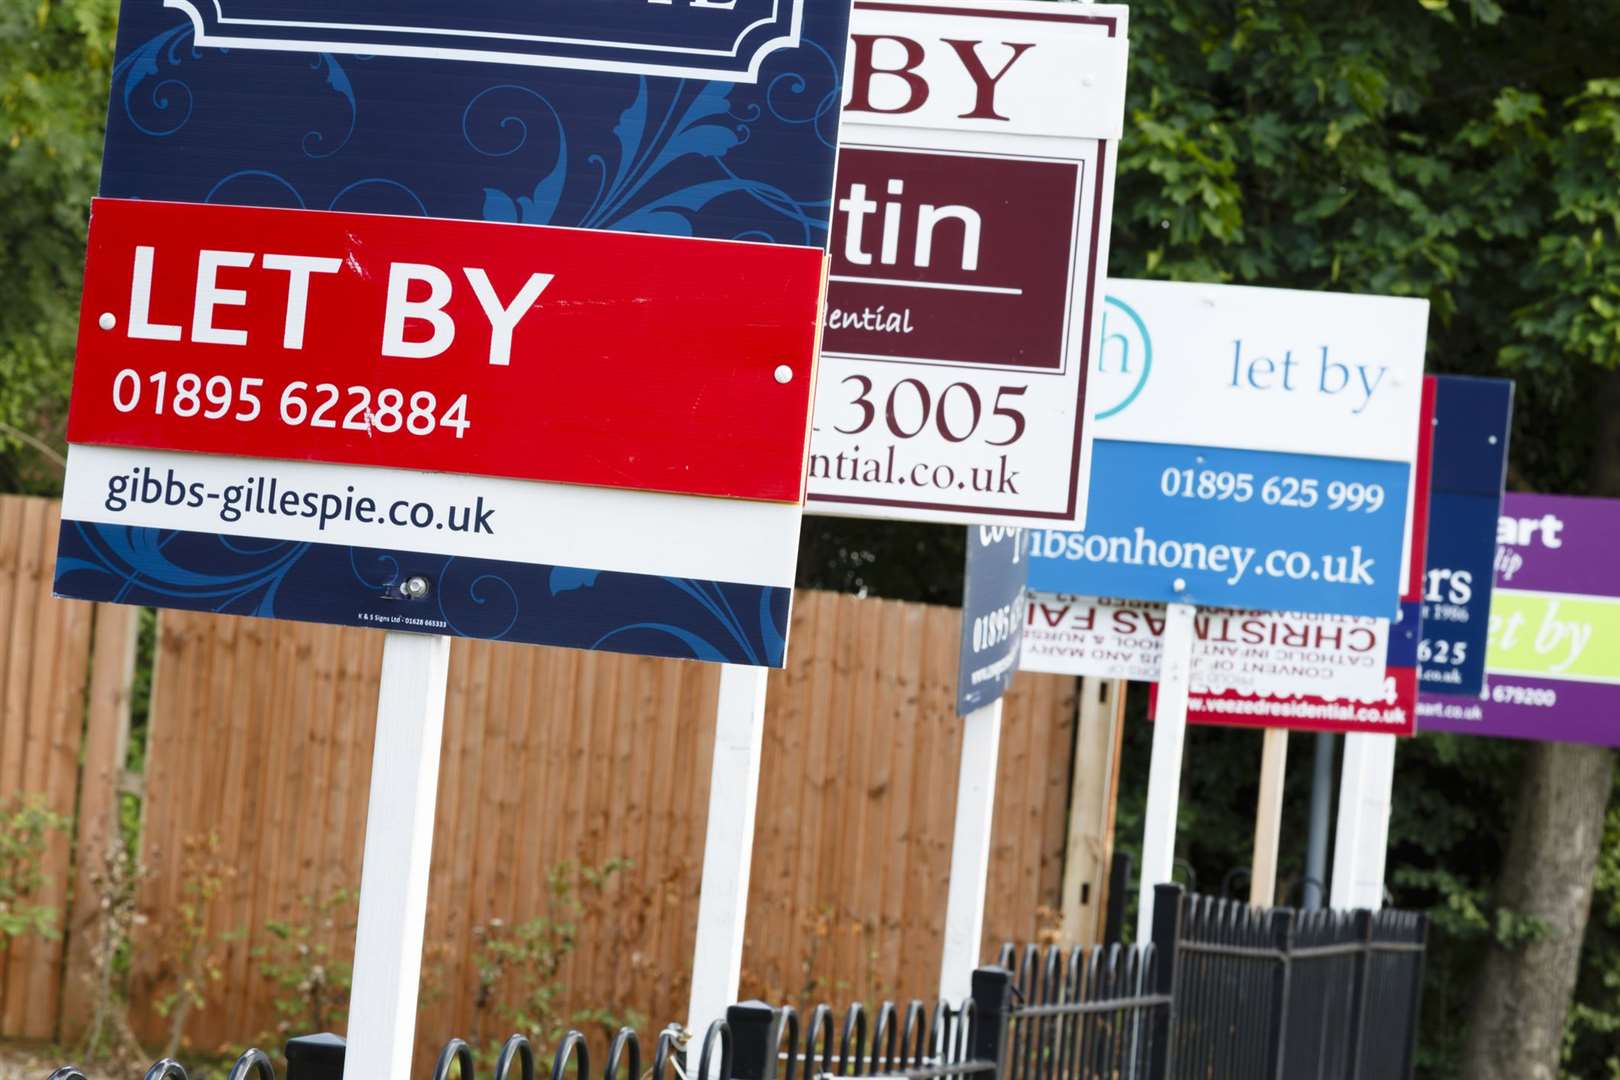 Low-earning families in Kent cannot afford private rent